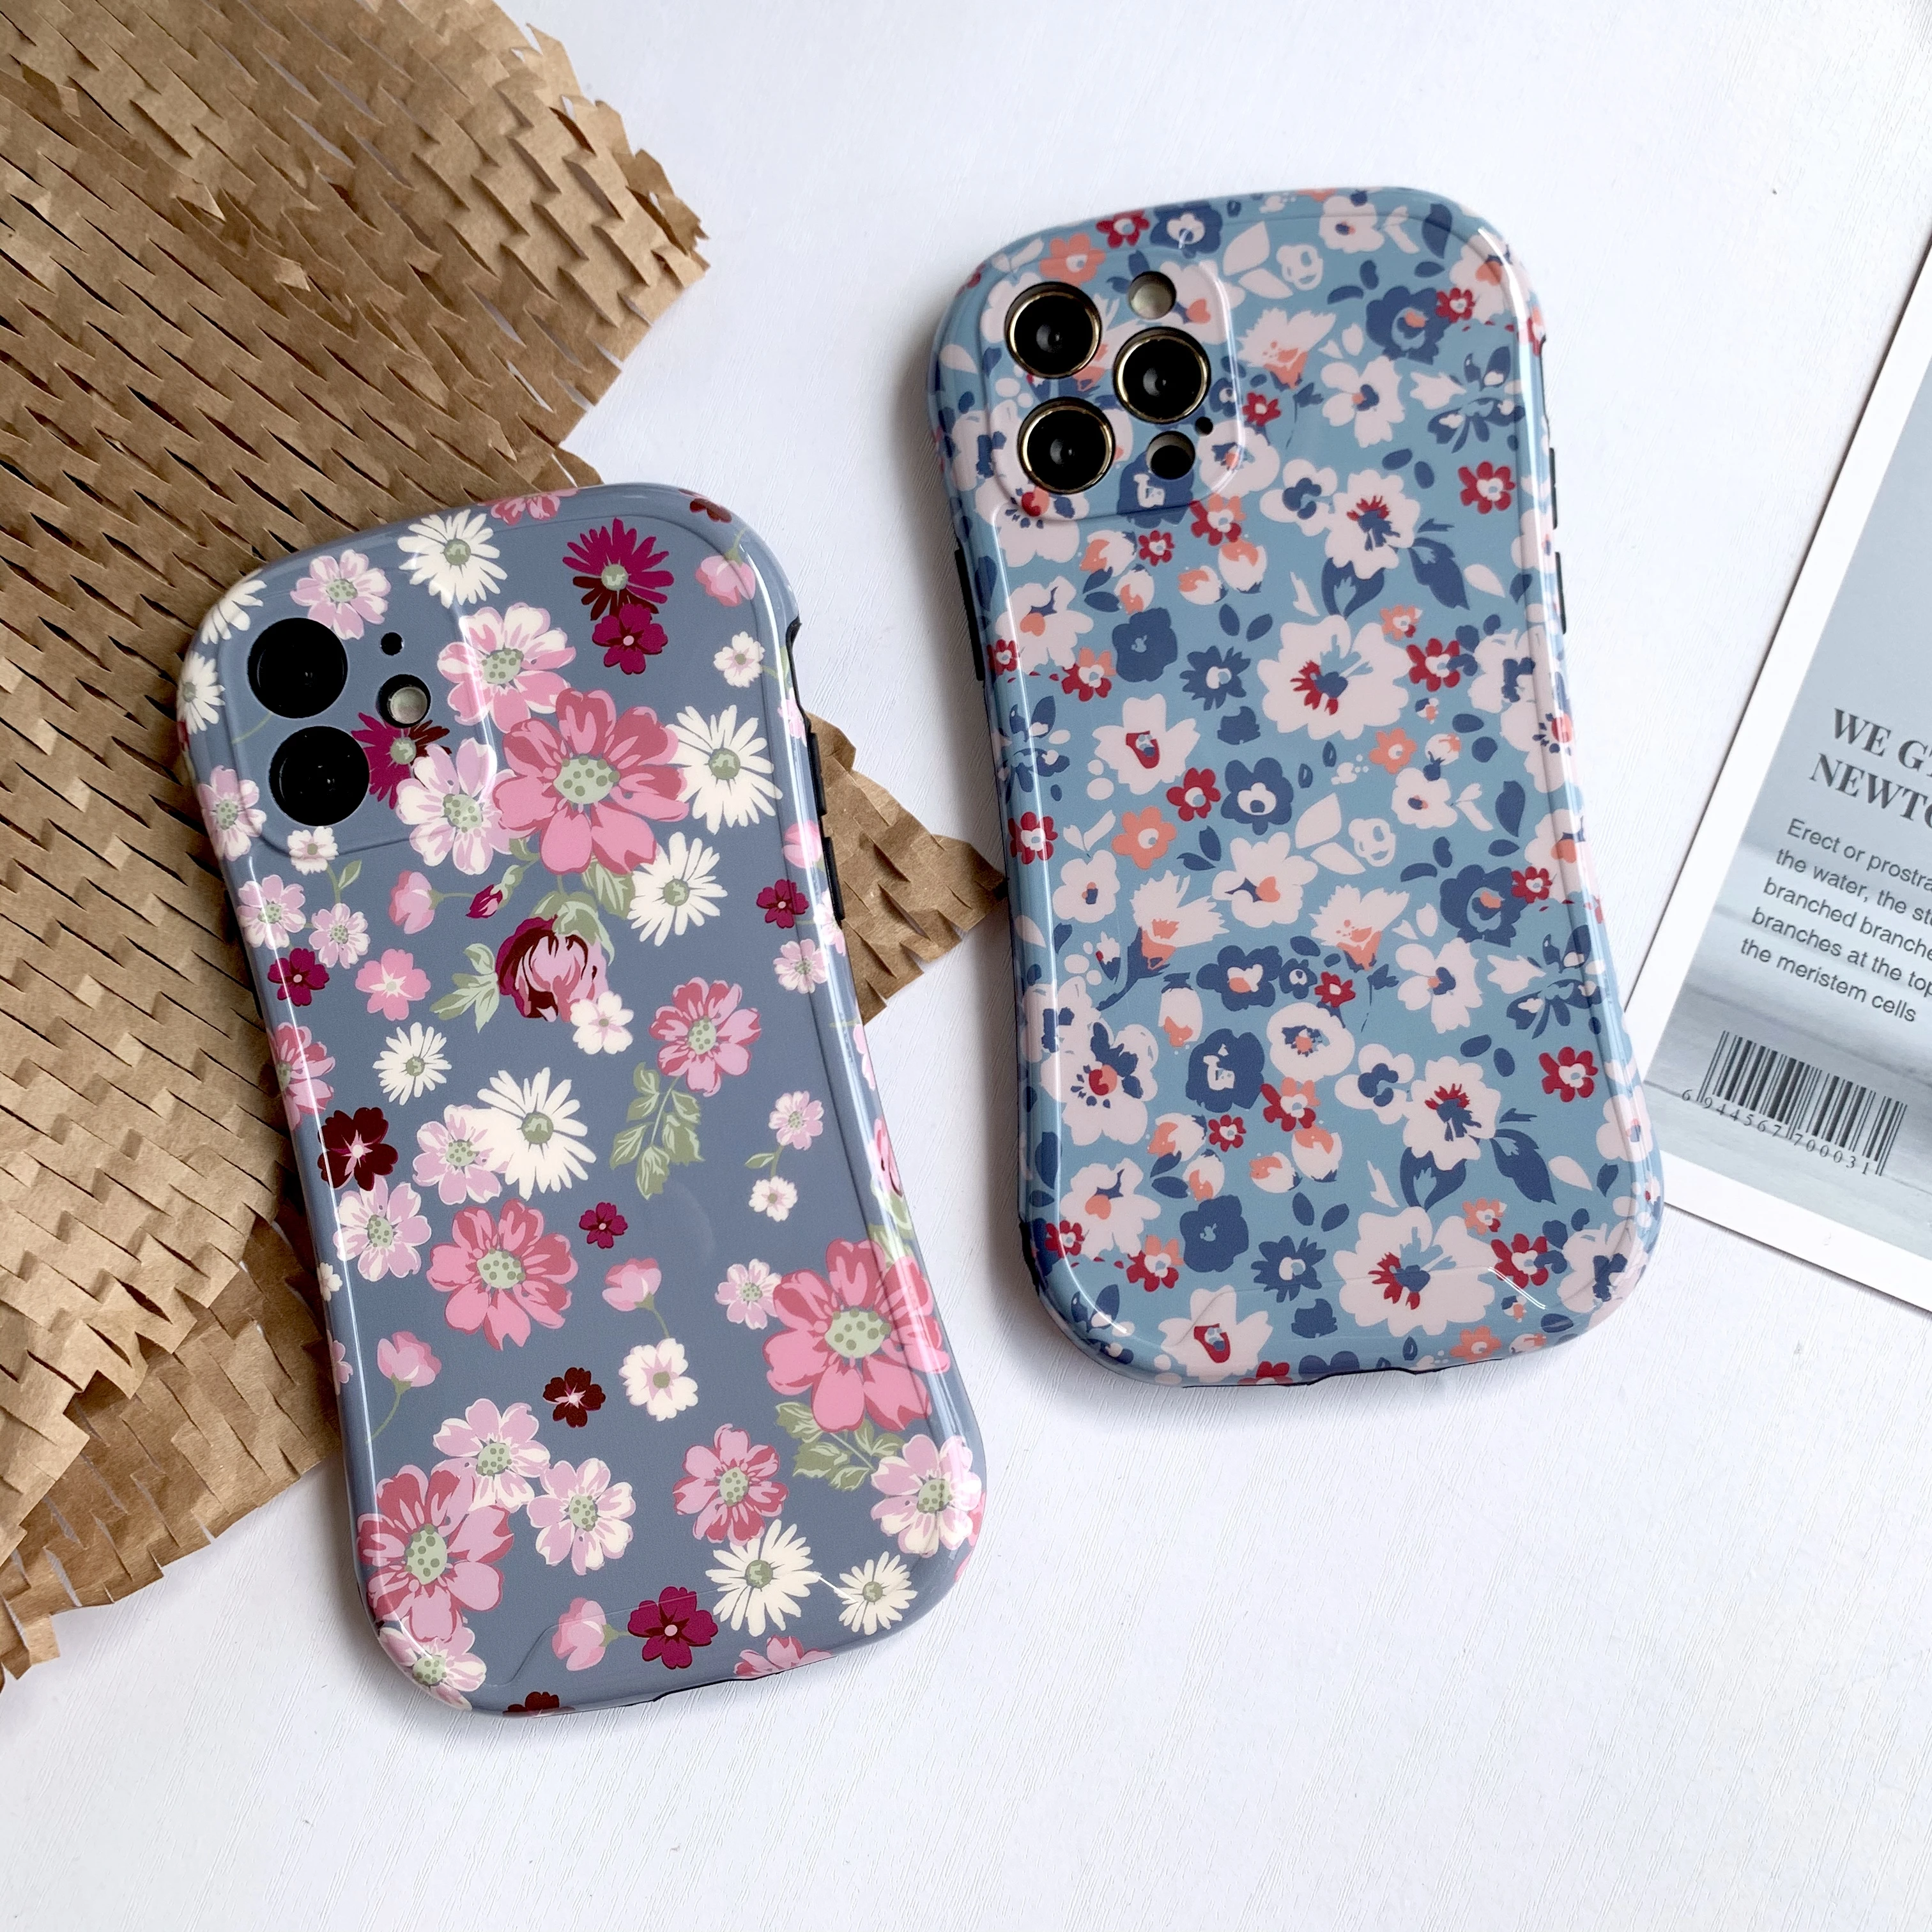 Fashion Flower Phone Case For iphone 7 8 11 12 Mini Plus XR X XS Pro MAX SE 2020 Luxury Shockproof Silicone IMD Protection Cover iphone 7 phone cases